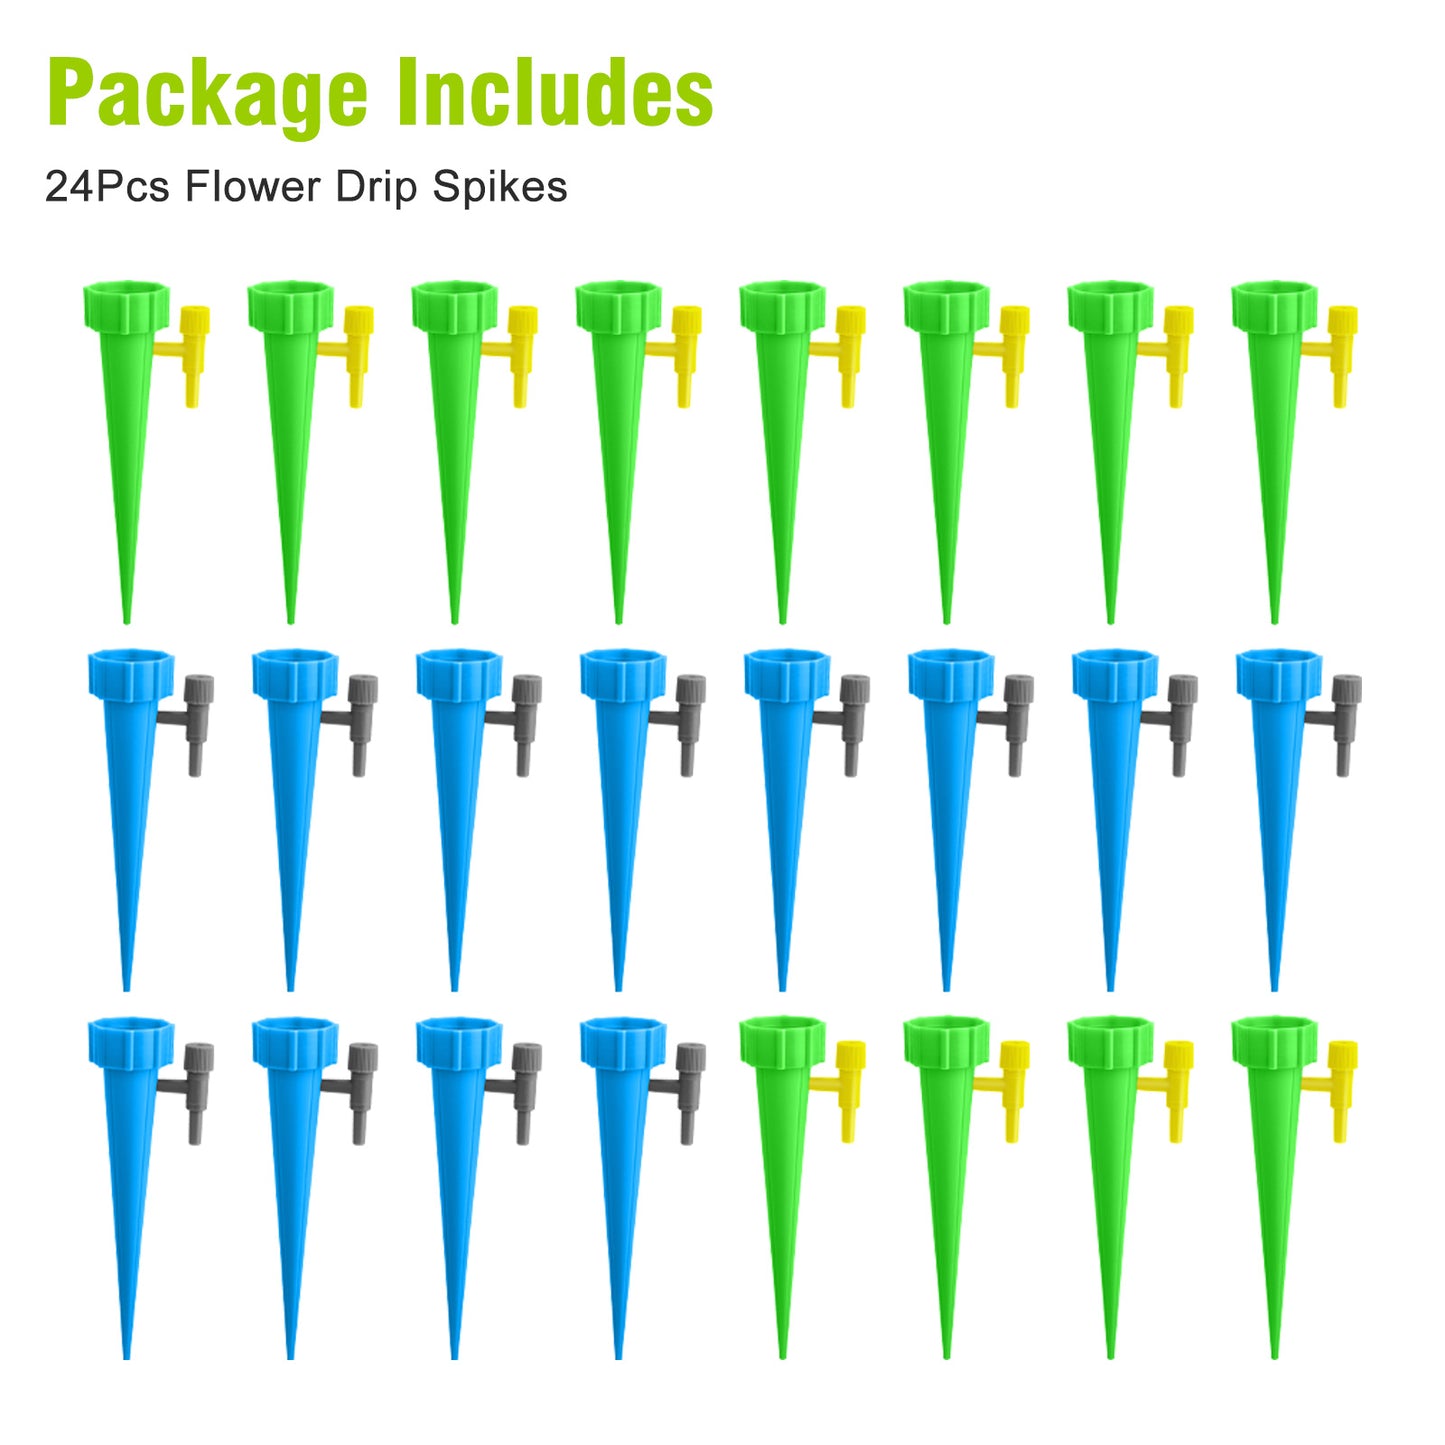 24 PCS Self Watering Spikes - Adjustable Valve for Convenient Plant Care - Eco-Friendly and Durable